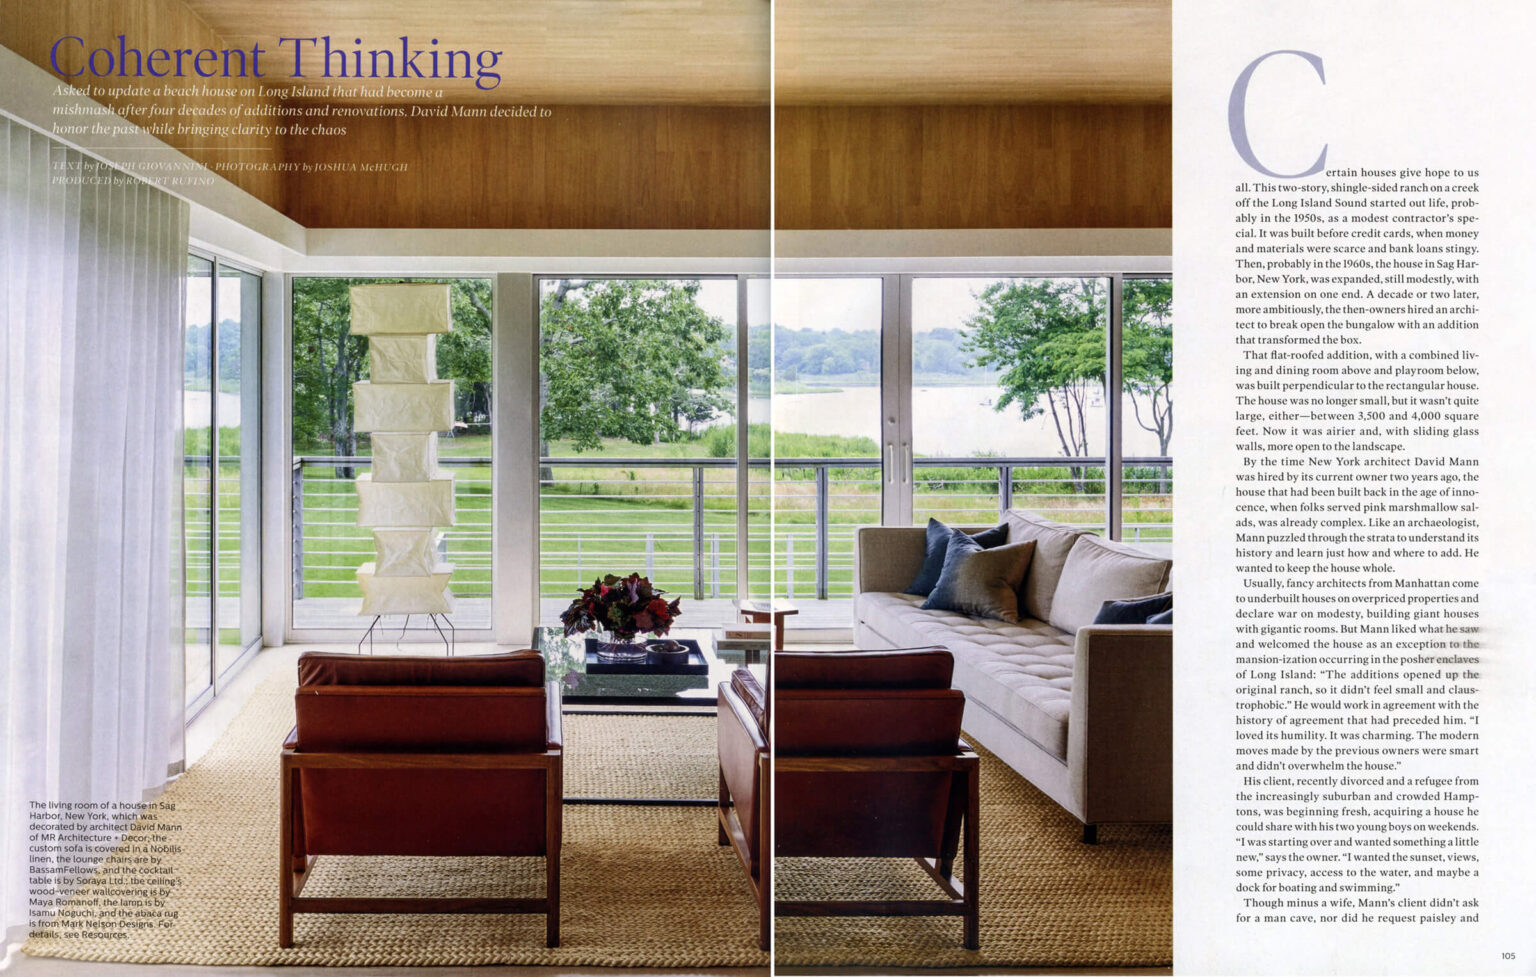 A double page spread of a story in Elle Decor titled Coherent Thinking about a home by MR Architecture + Decor in Long Island, NY.